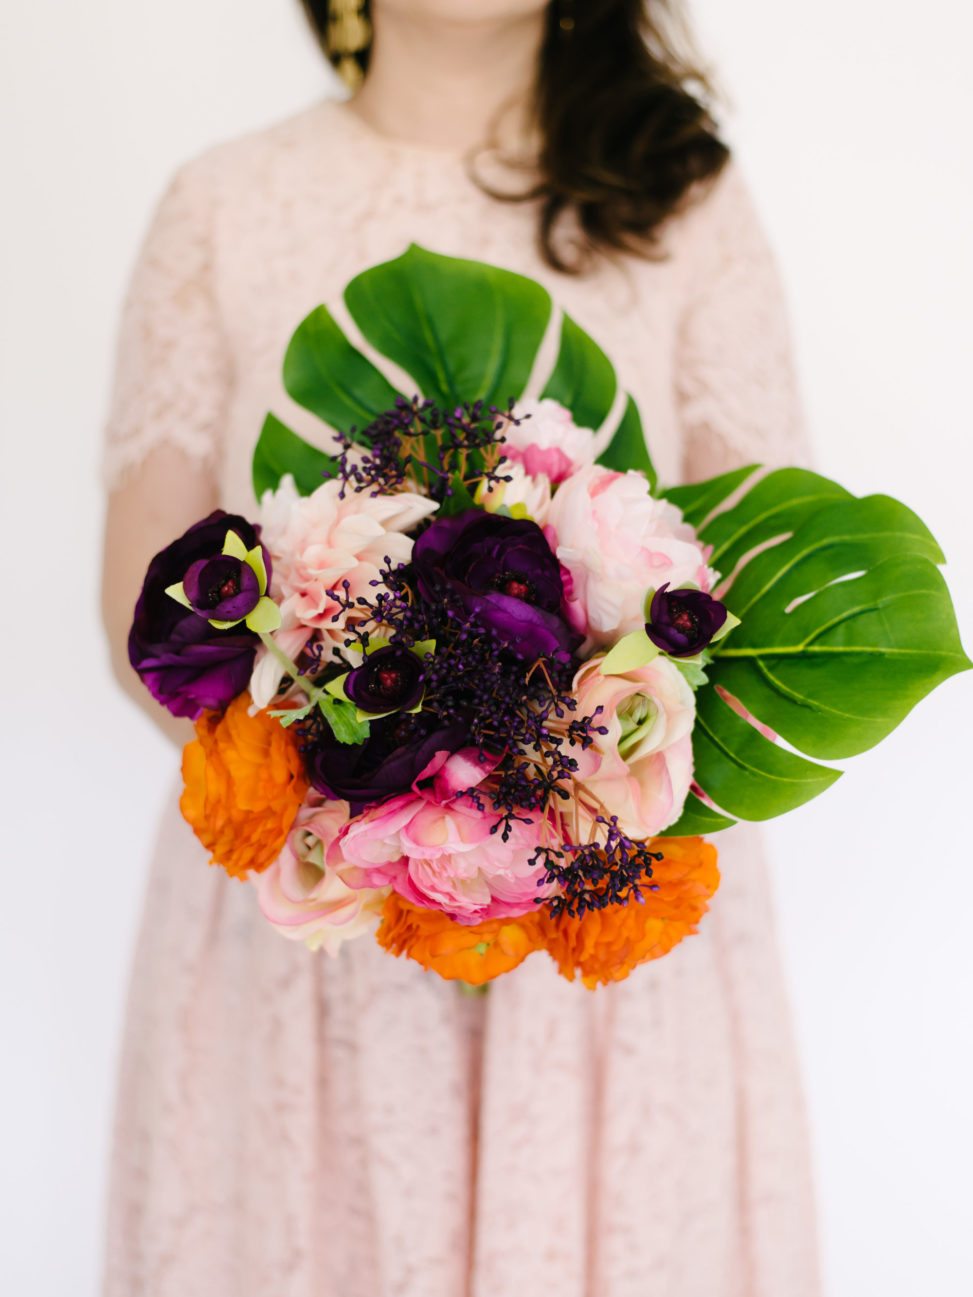 Fake flower arrangement that looks real with silk leafs and silk peonies held by woman in dress